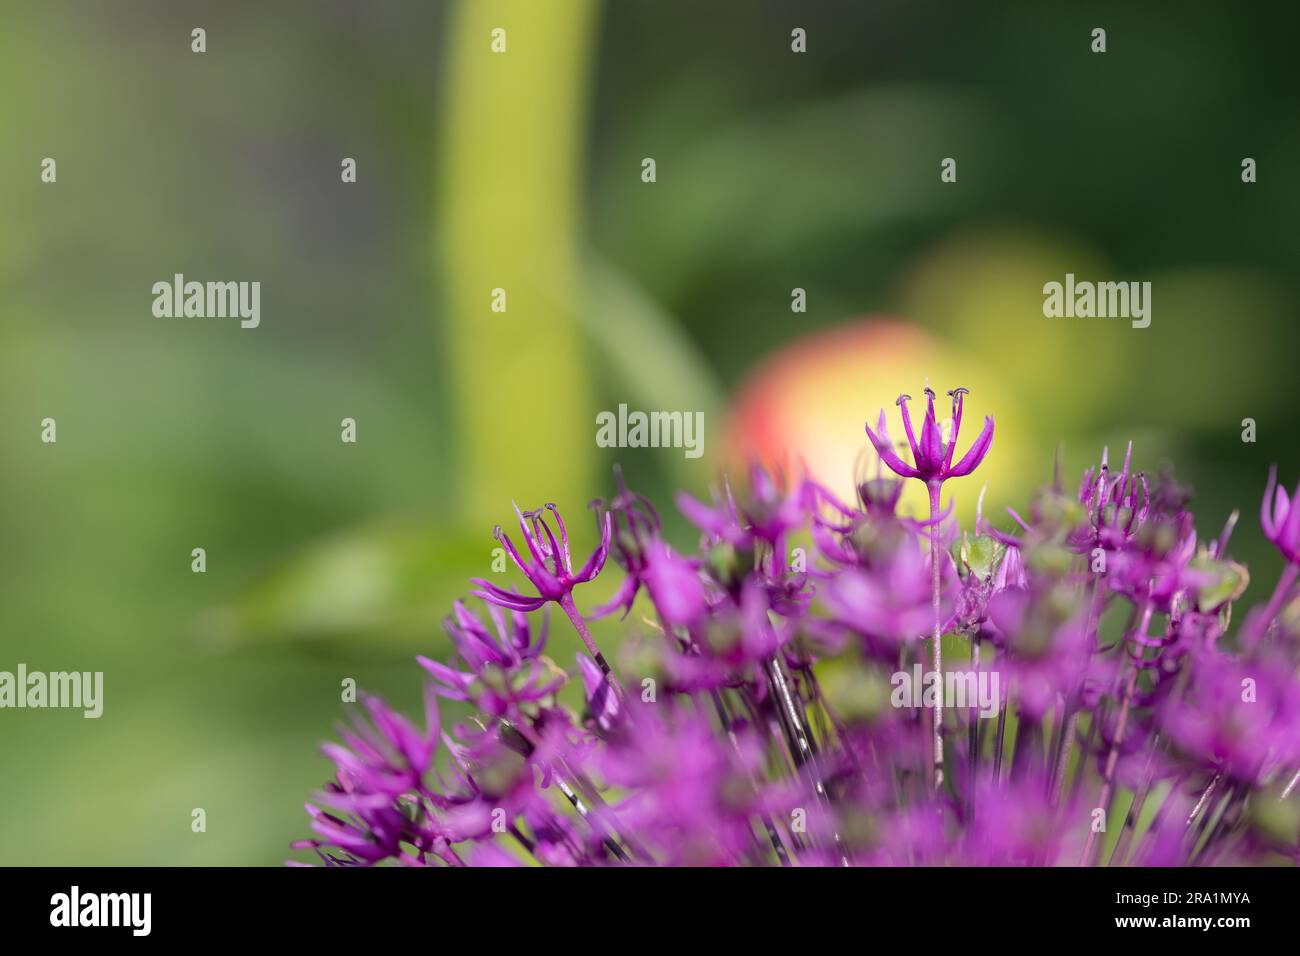 Close-up of blossoms of velvet allium lusitanicum with a blurred green background Stock Photo